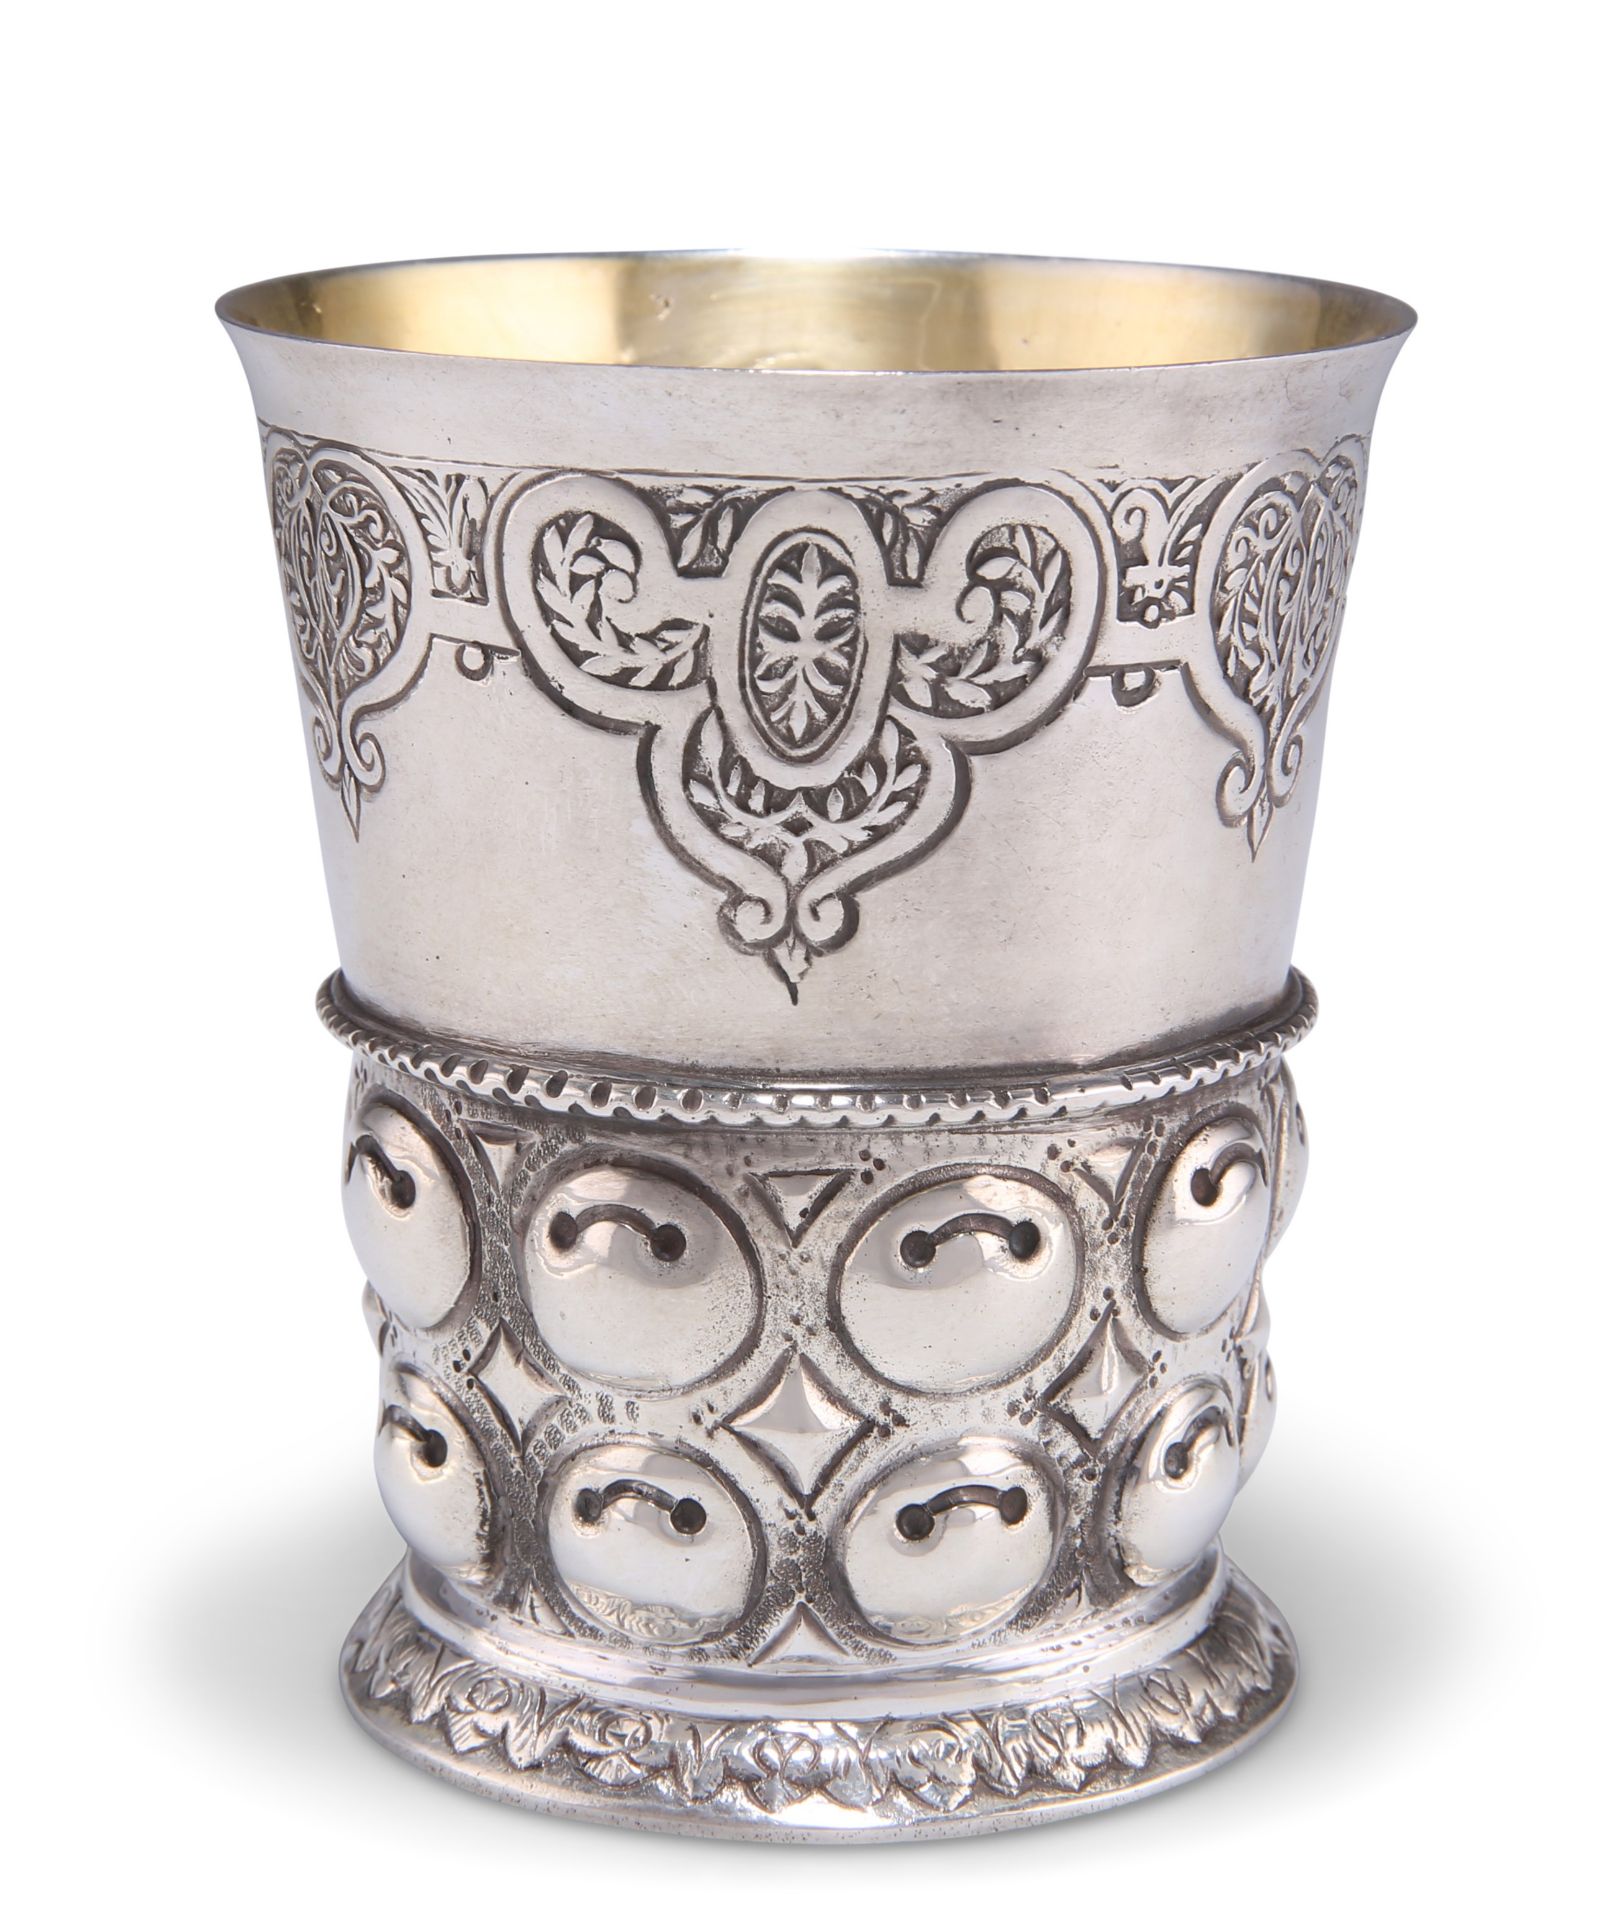 AN EARLY 18TH CENTURY GERMAN SILVER BEAKER CUP,